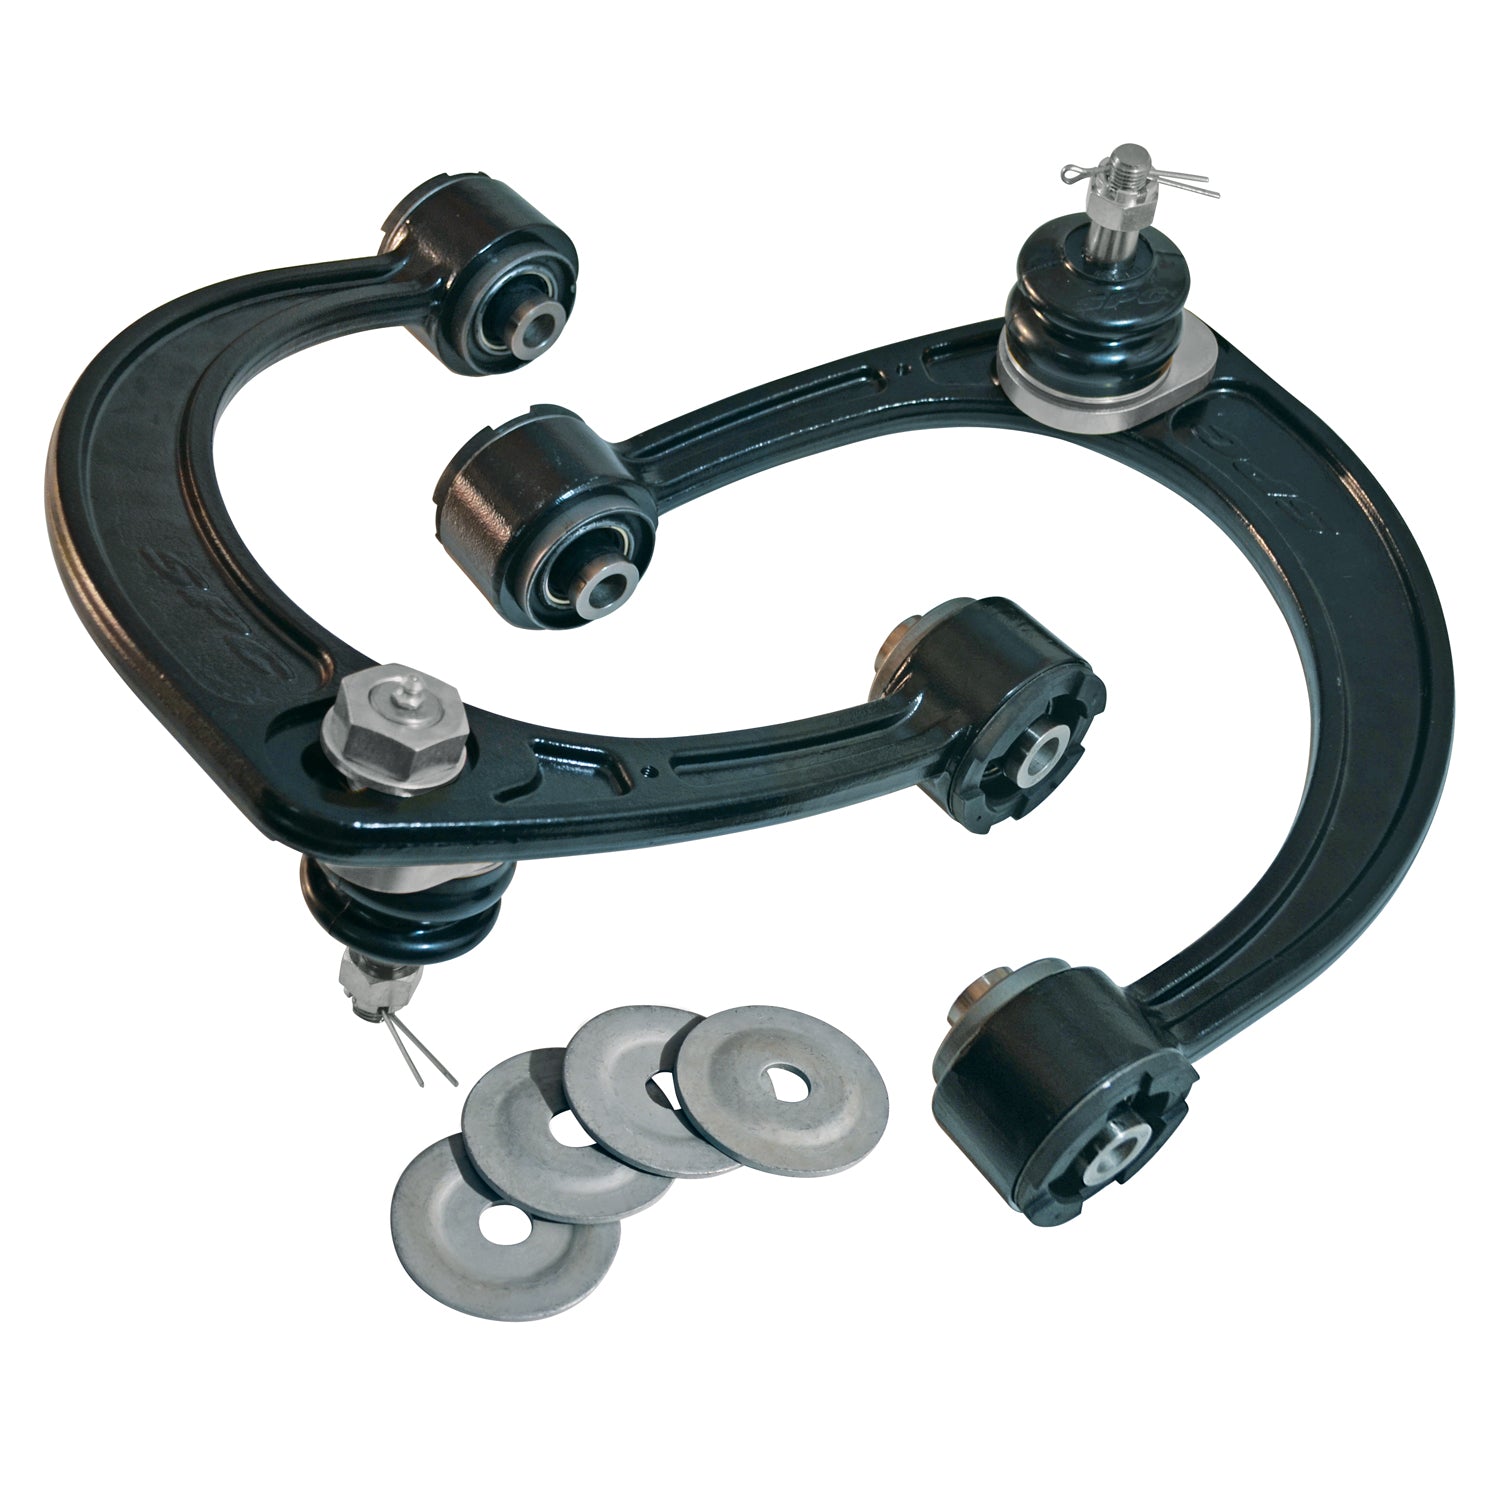 SPC Performance Front Upper Control Arms for 2003+ GX, 2007-2014 FJ Cruiser & 2003+ 4Runner (25480)